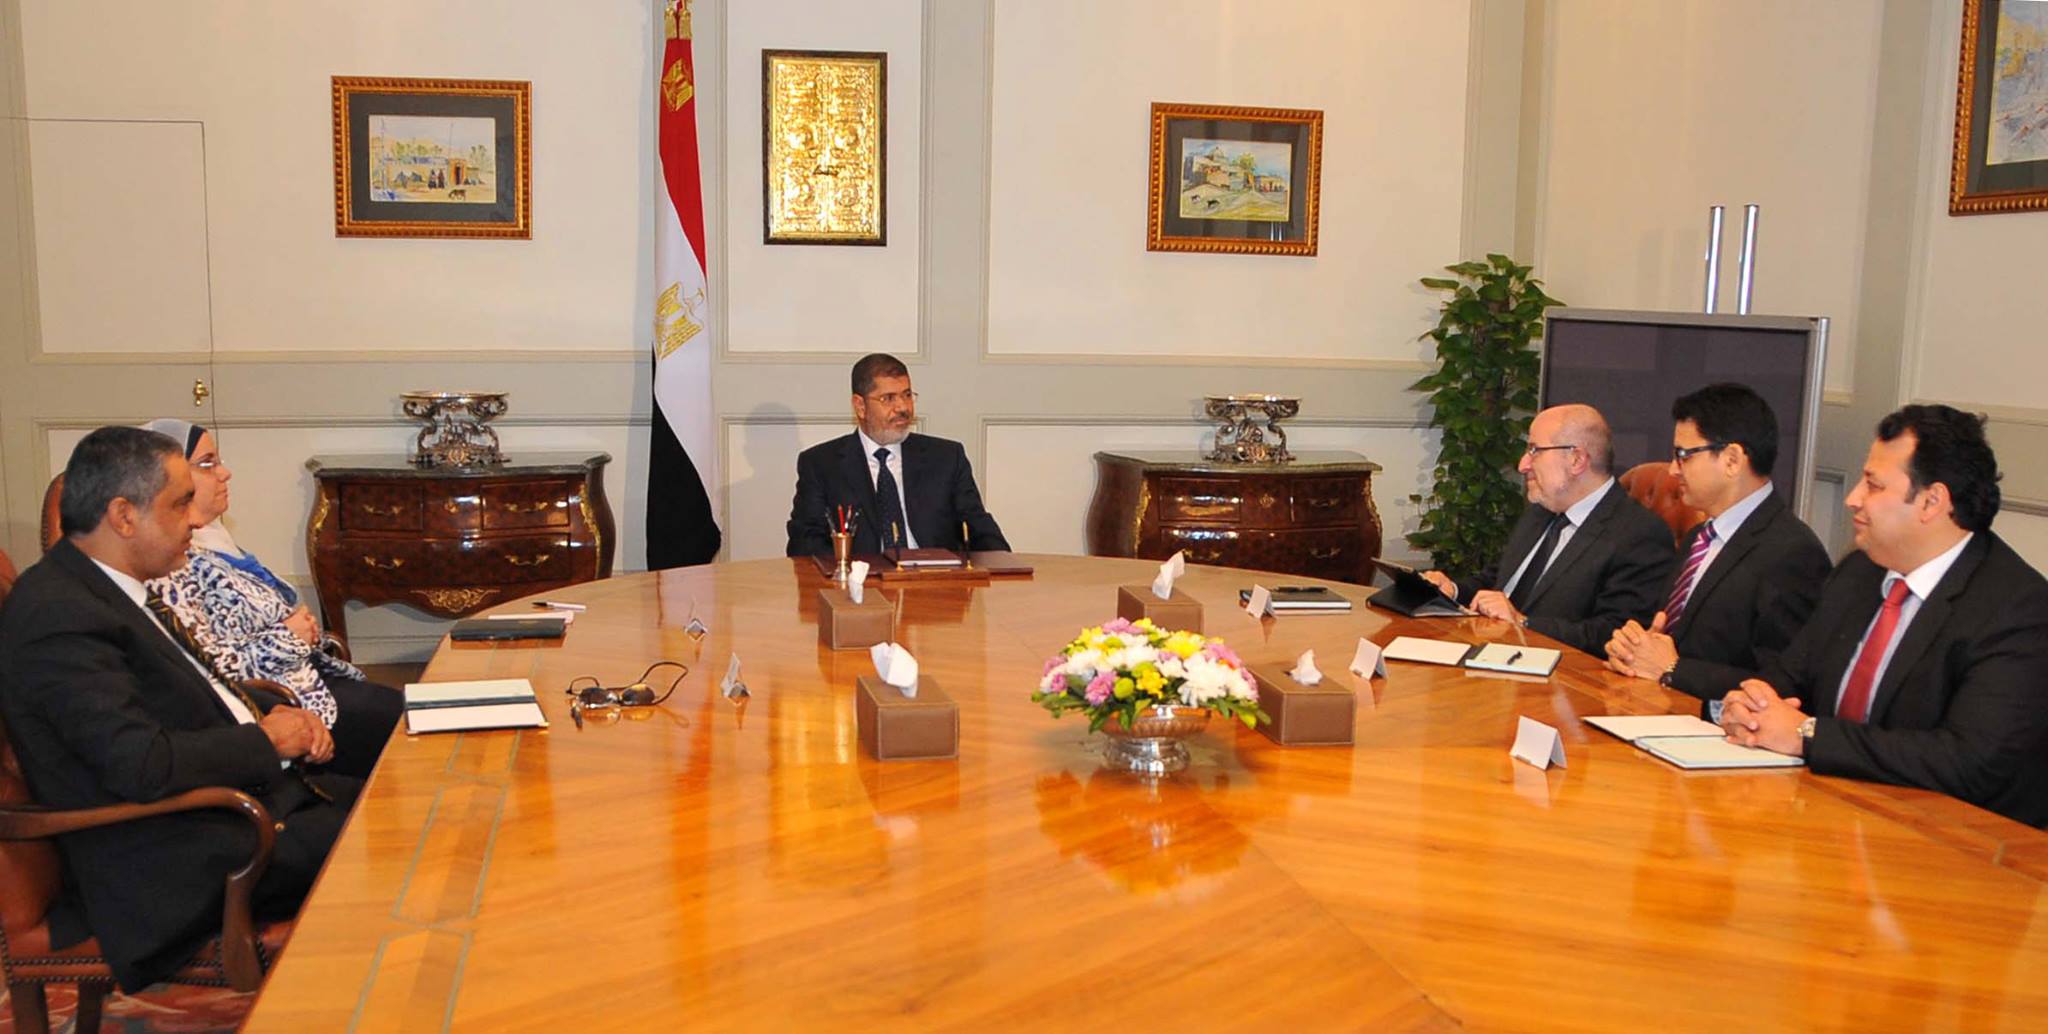 President Mursi meets with Wasat party leaders to discuss initiative